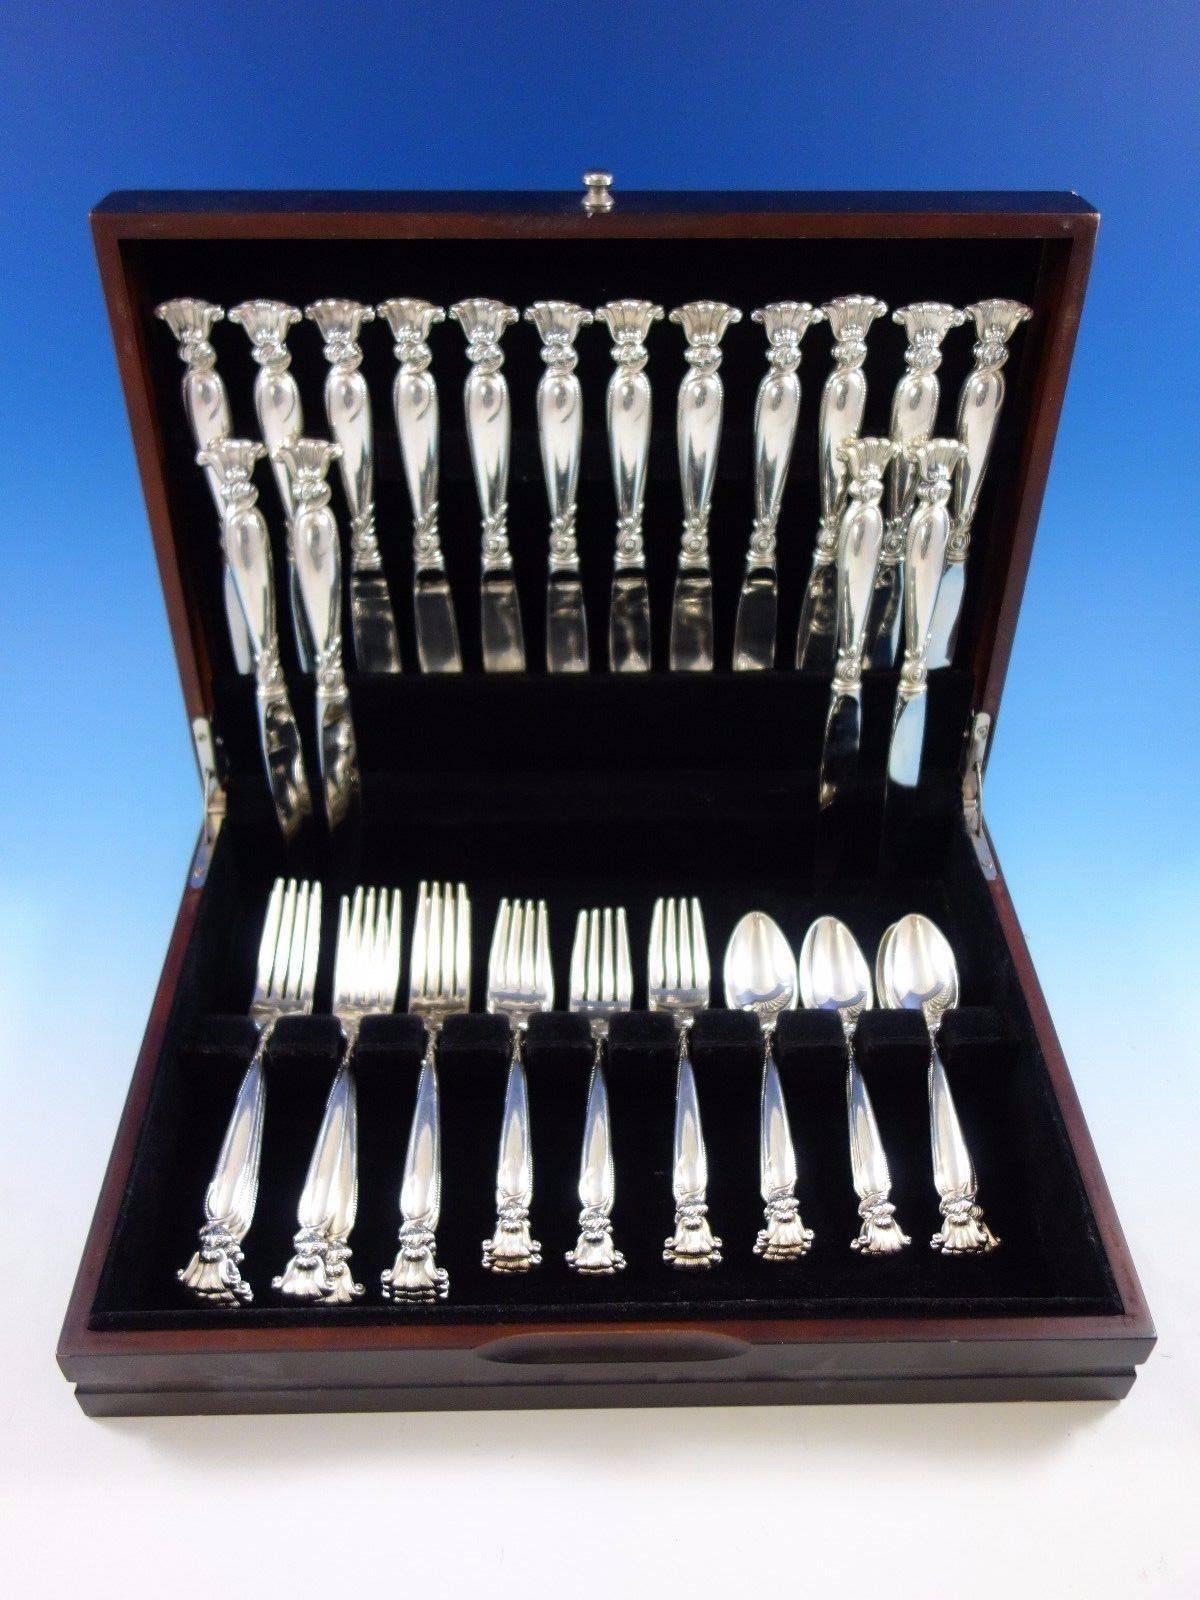 Romance of the sea by Wallace sterling silver flatware set - 40 pieces. This is a great starter set and includes: 

eight knives, 9 1/8